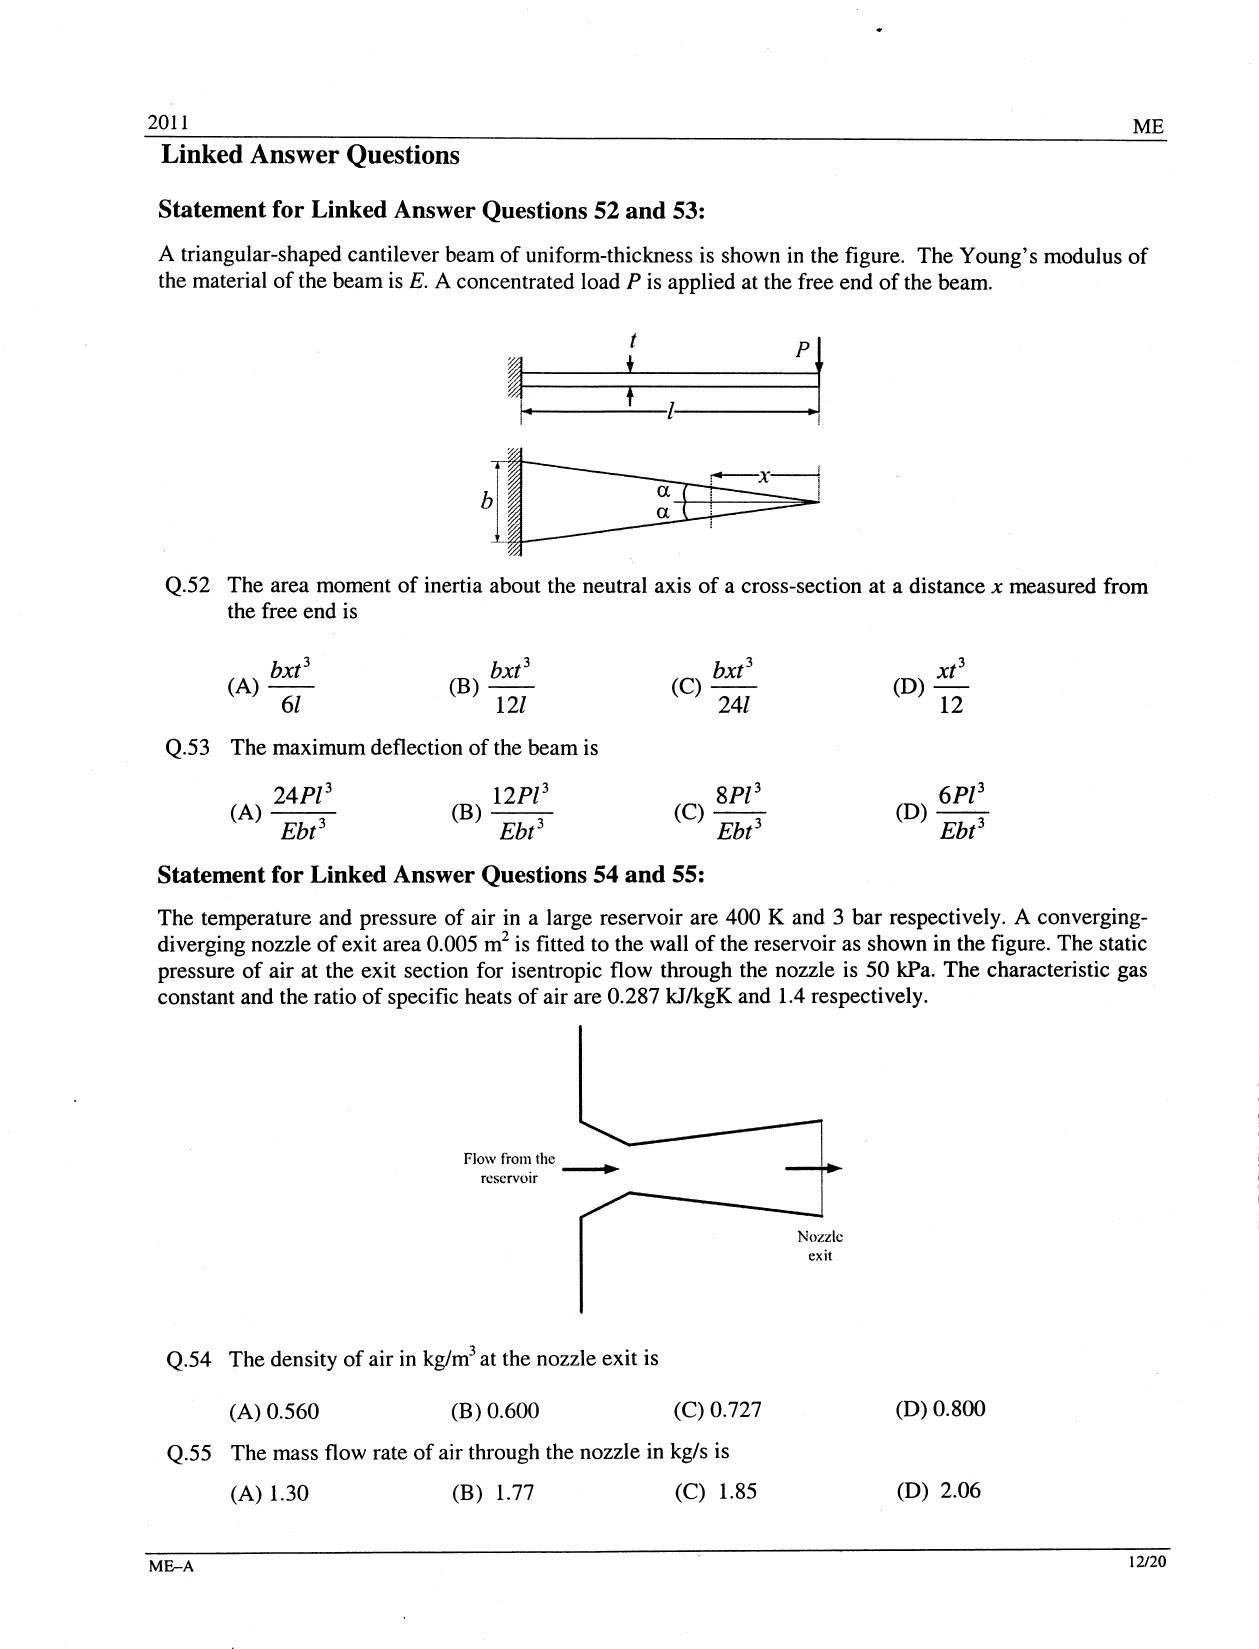 GATE Exam Question Paper 2011 Mechanical Engineering 12